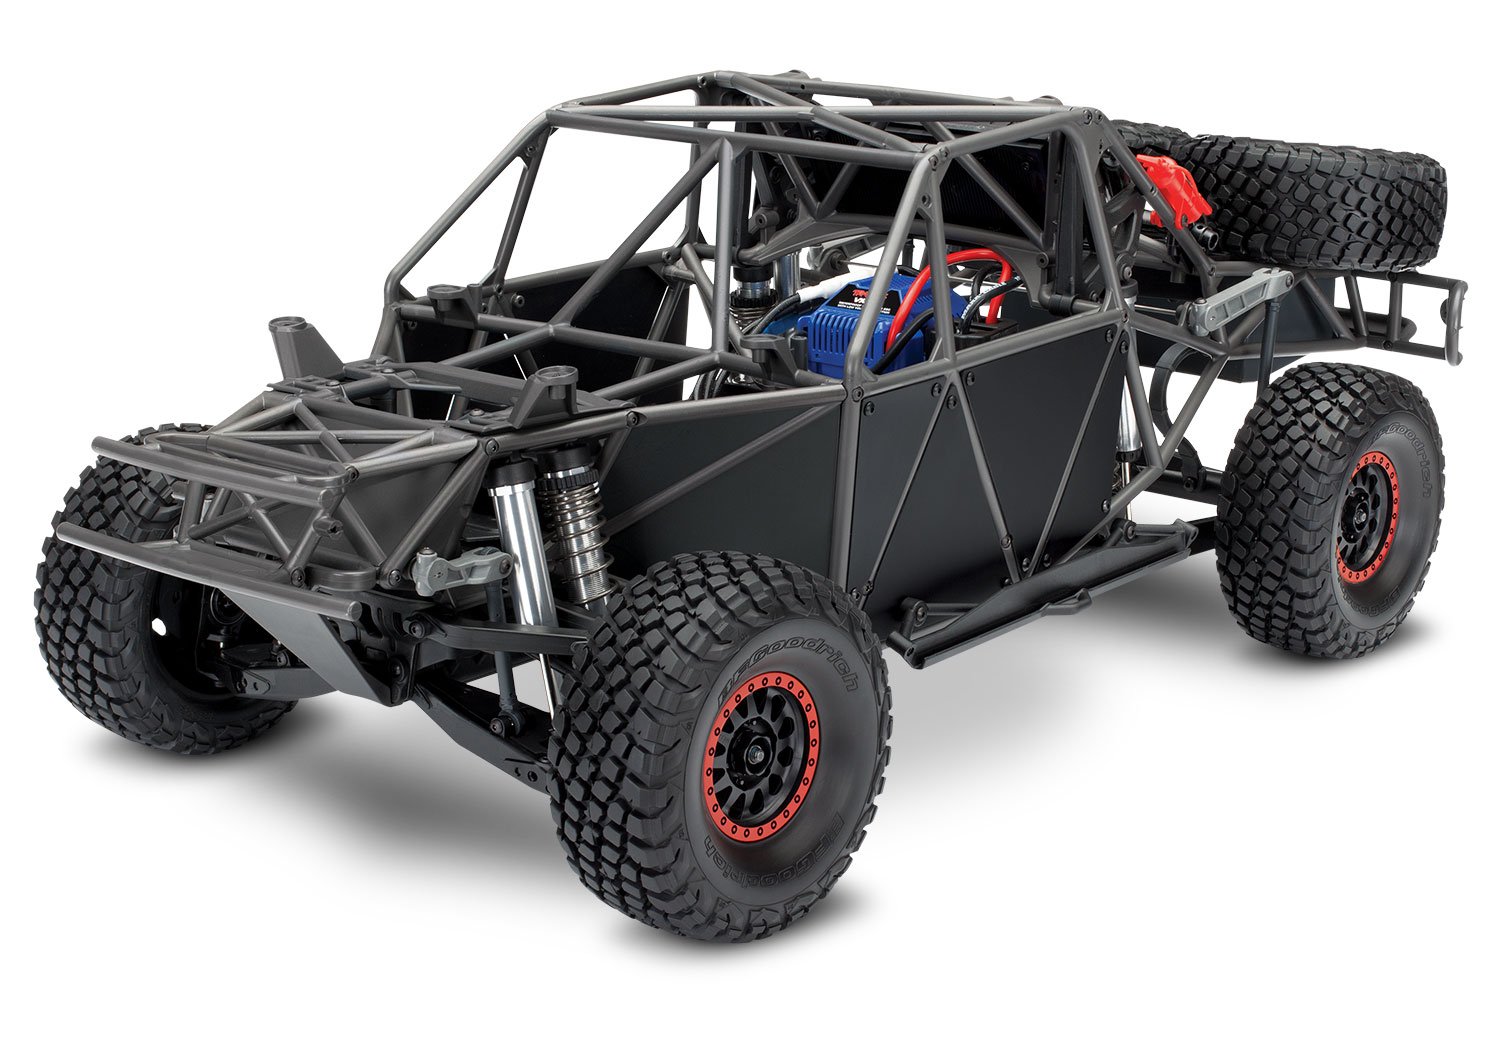 chassis-3qtr-rigid